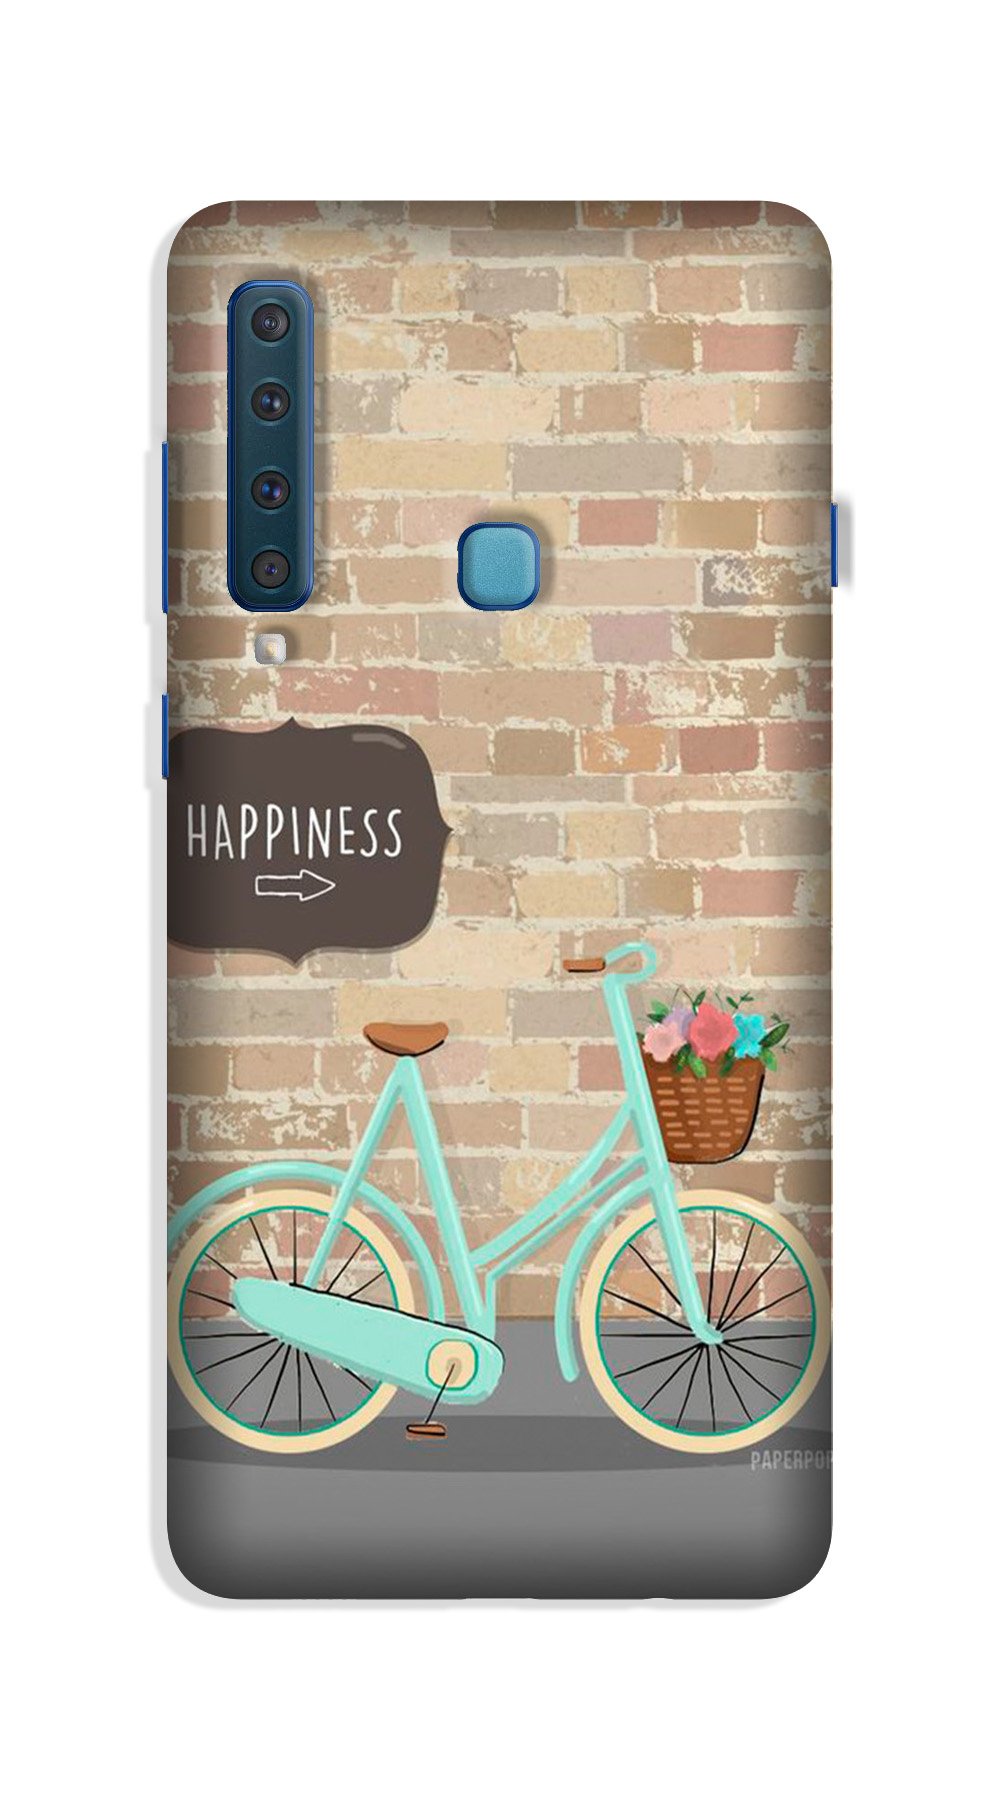 Happiness Case for Galaxy A9 (2018)